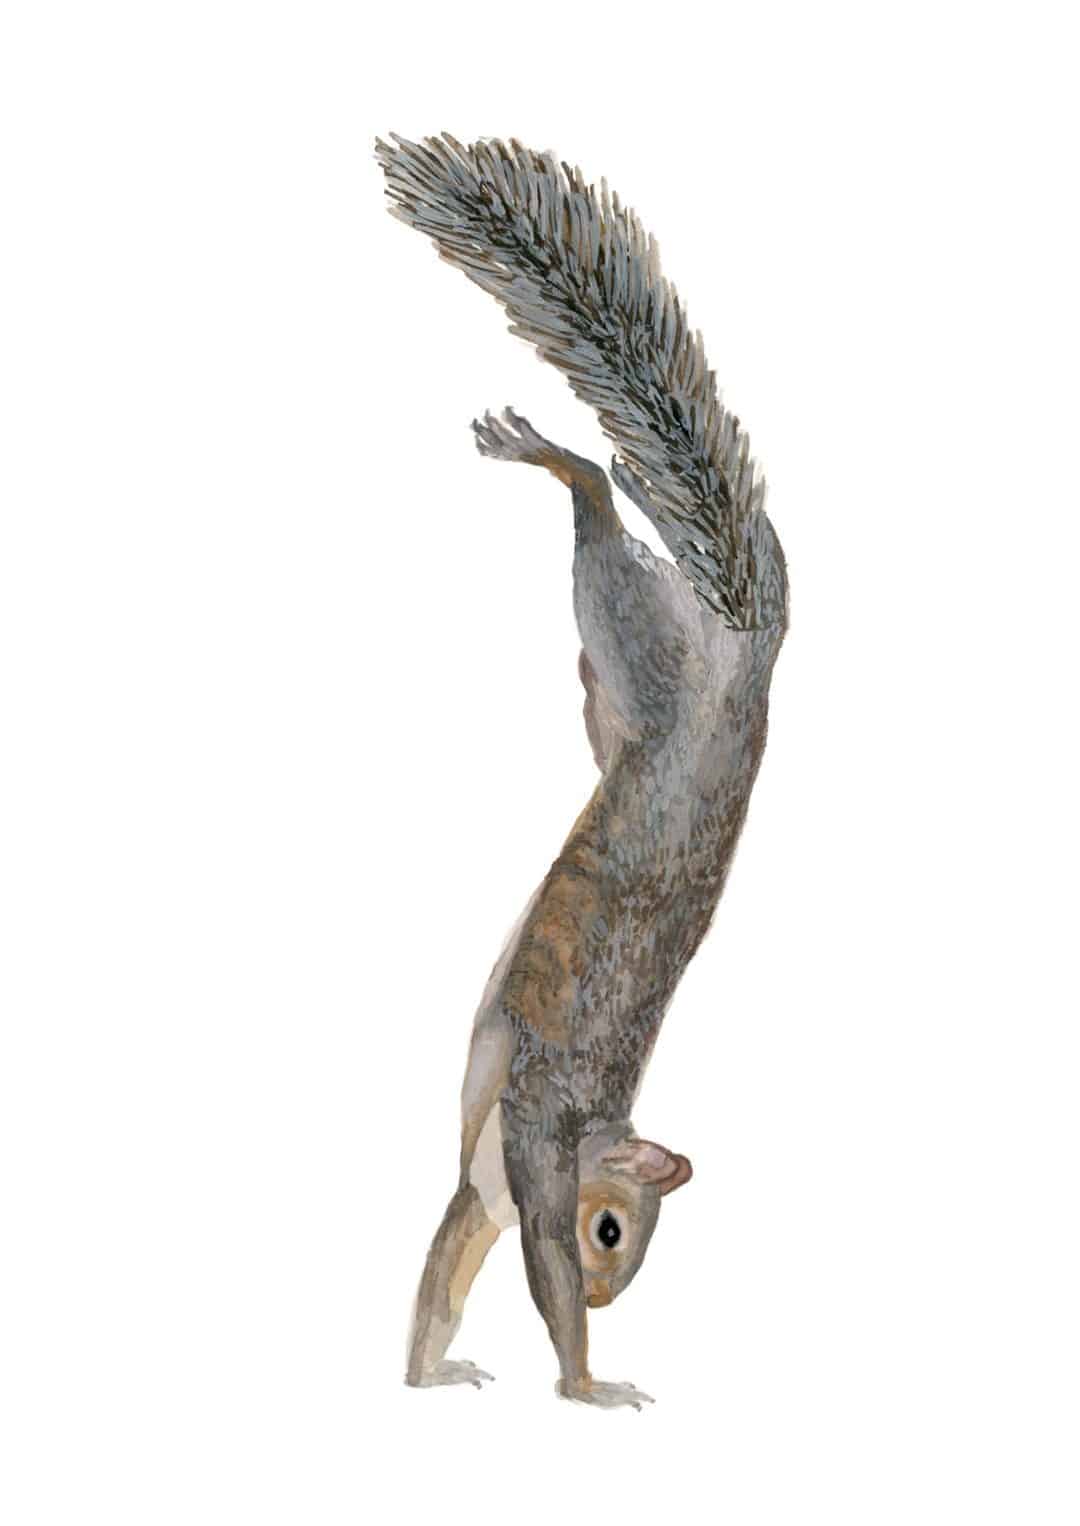 Chantal Rousseau, Squirrels Working Out: Handstand Walk (still), 2020, GIF. Collection of the artist